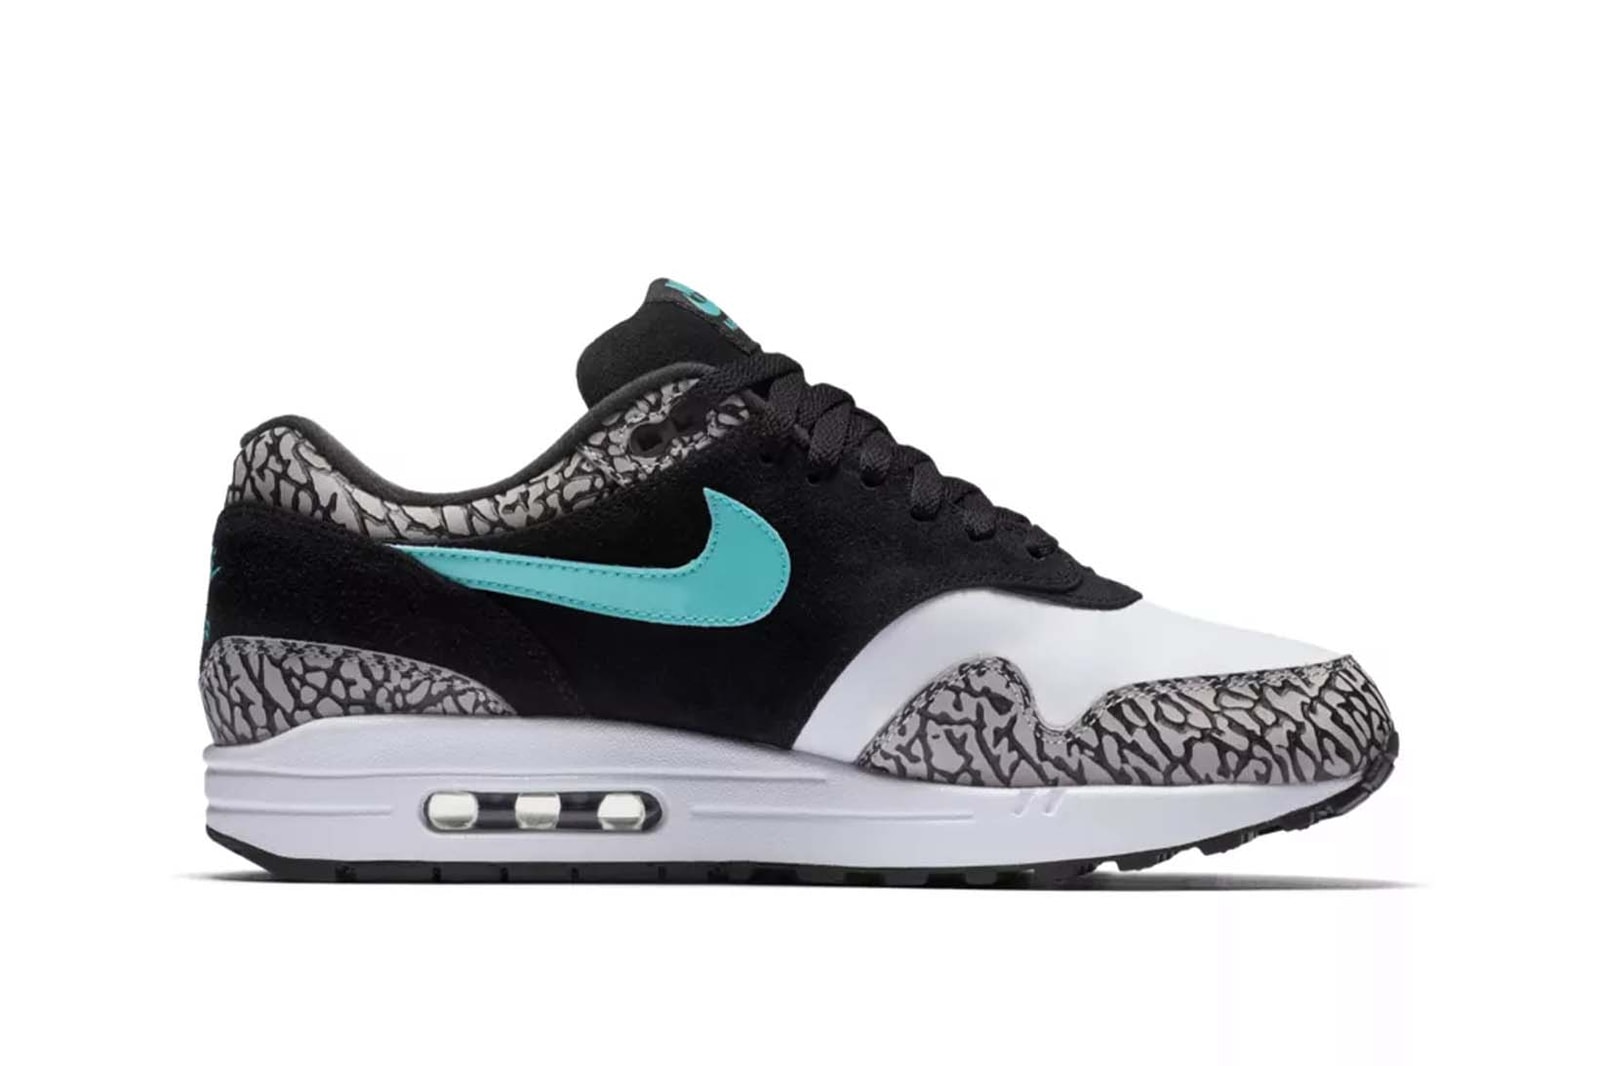 Nike Air Max Day iconic sneakers Parra atmos Silver Bullet